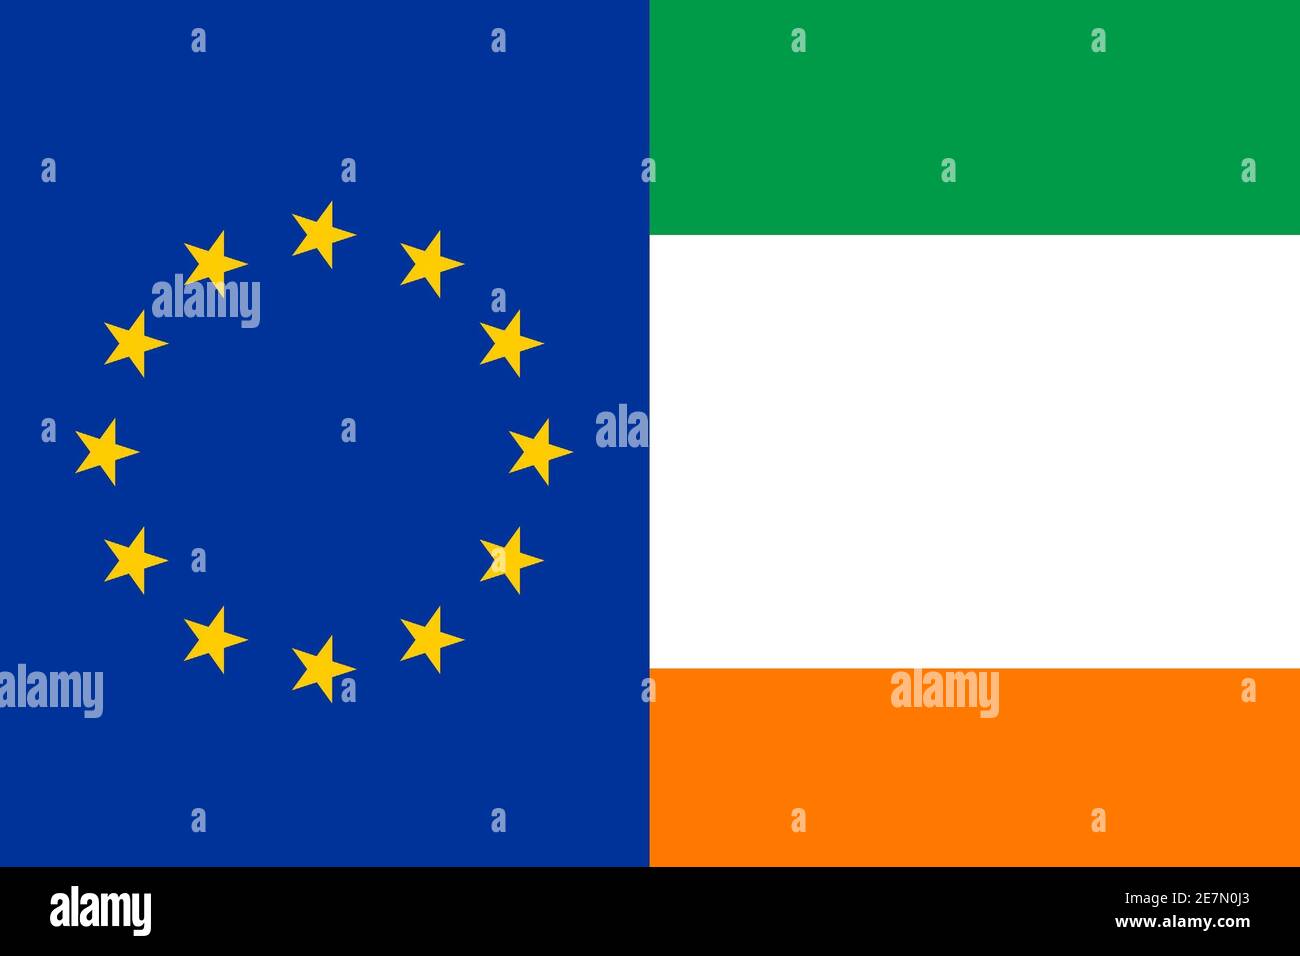 Illustration of the Flag of Ireland and the EU next to each other Stock Photo